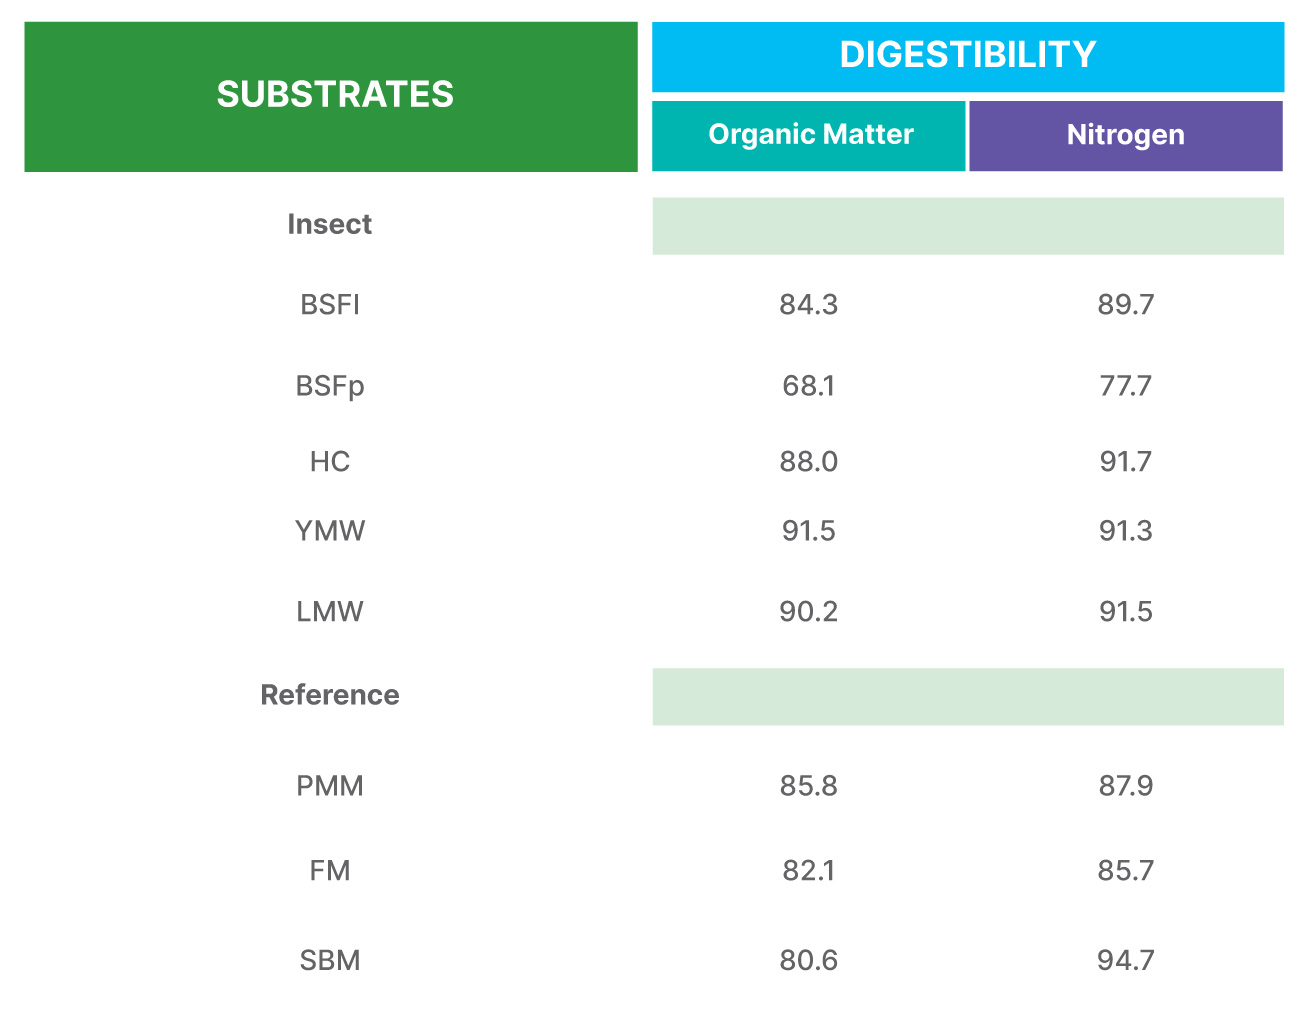 Insect Based Pet Food Table 2. In vitro digestibility (%) of insect and reference substrates.